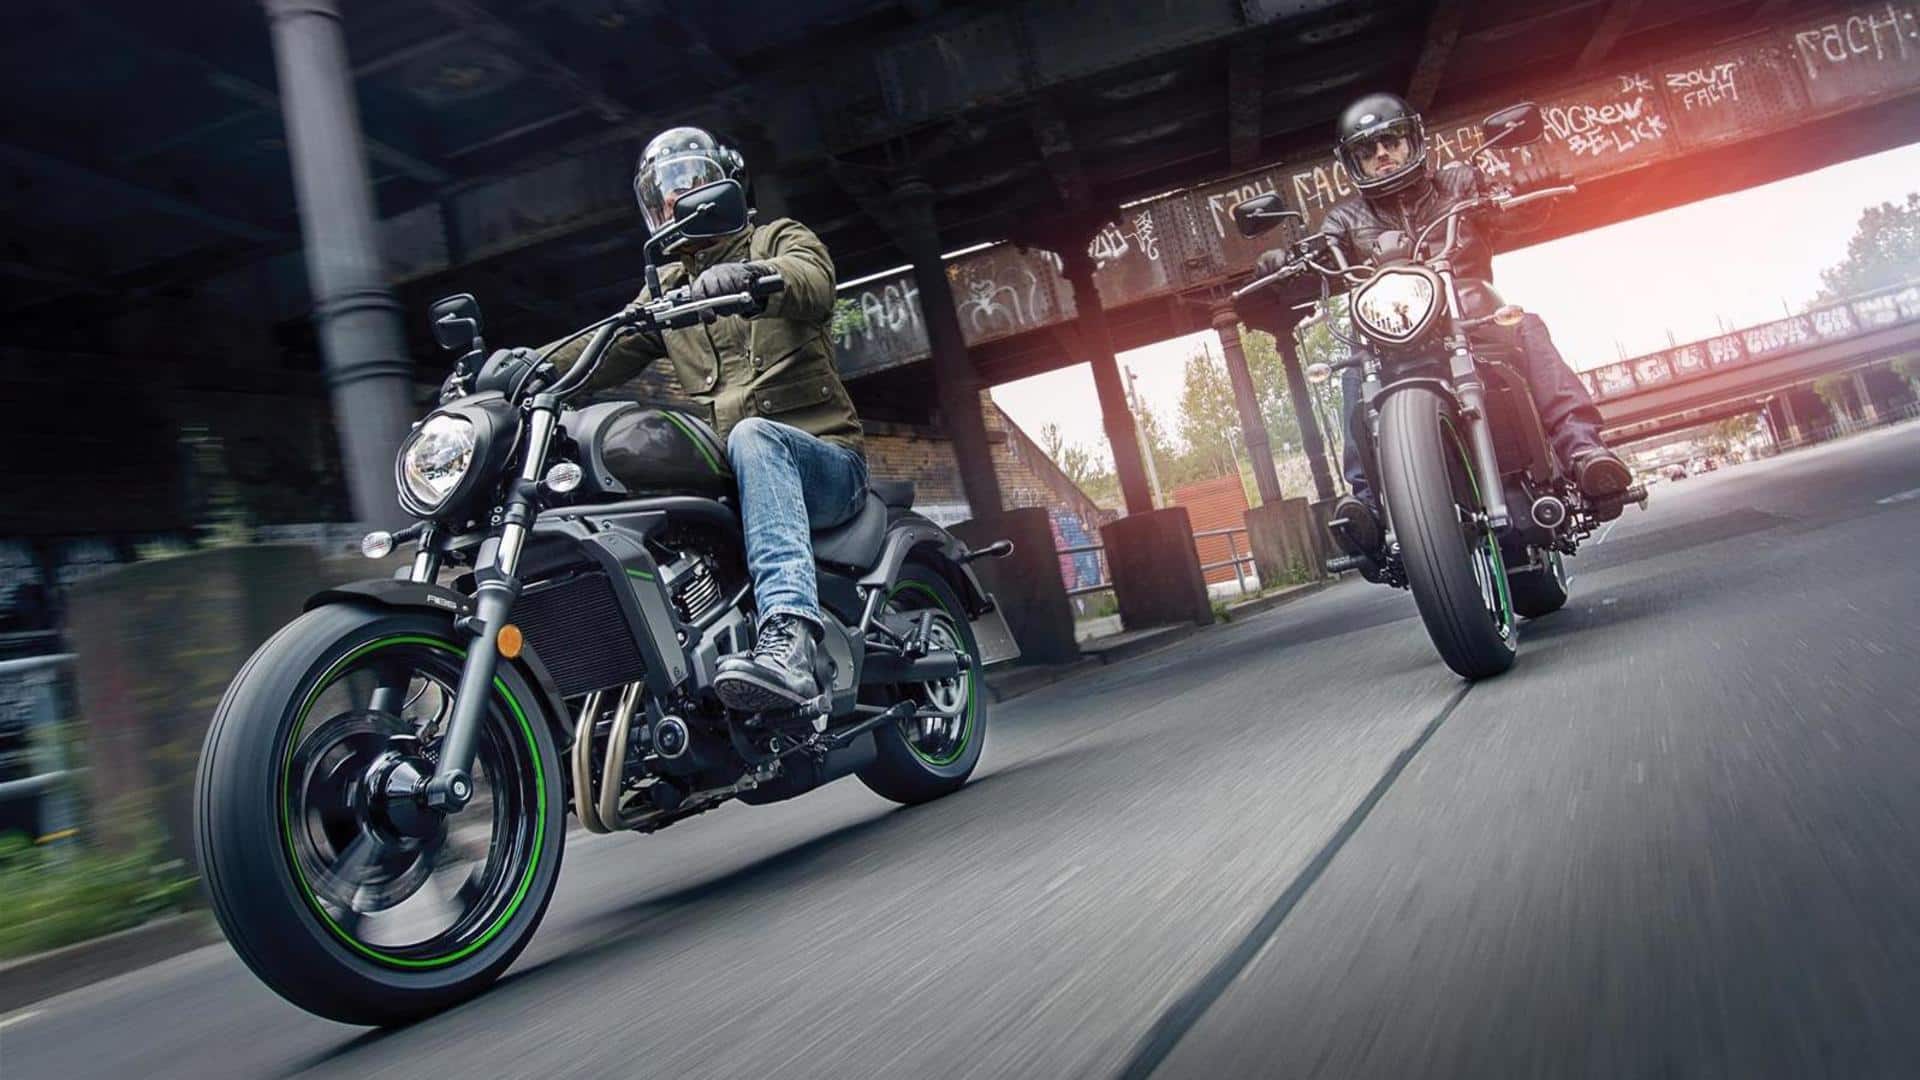 2023 Kawasaki Vulcan S launched in India: Check price, features